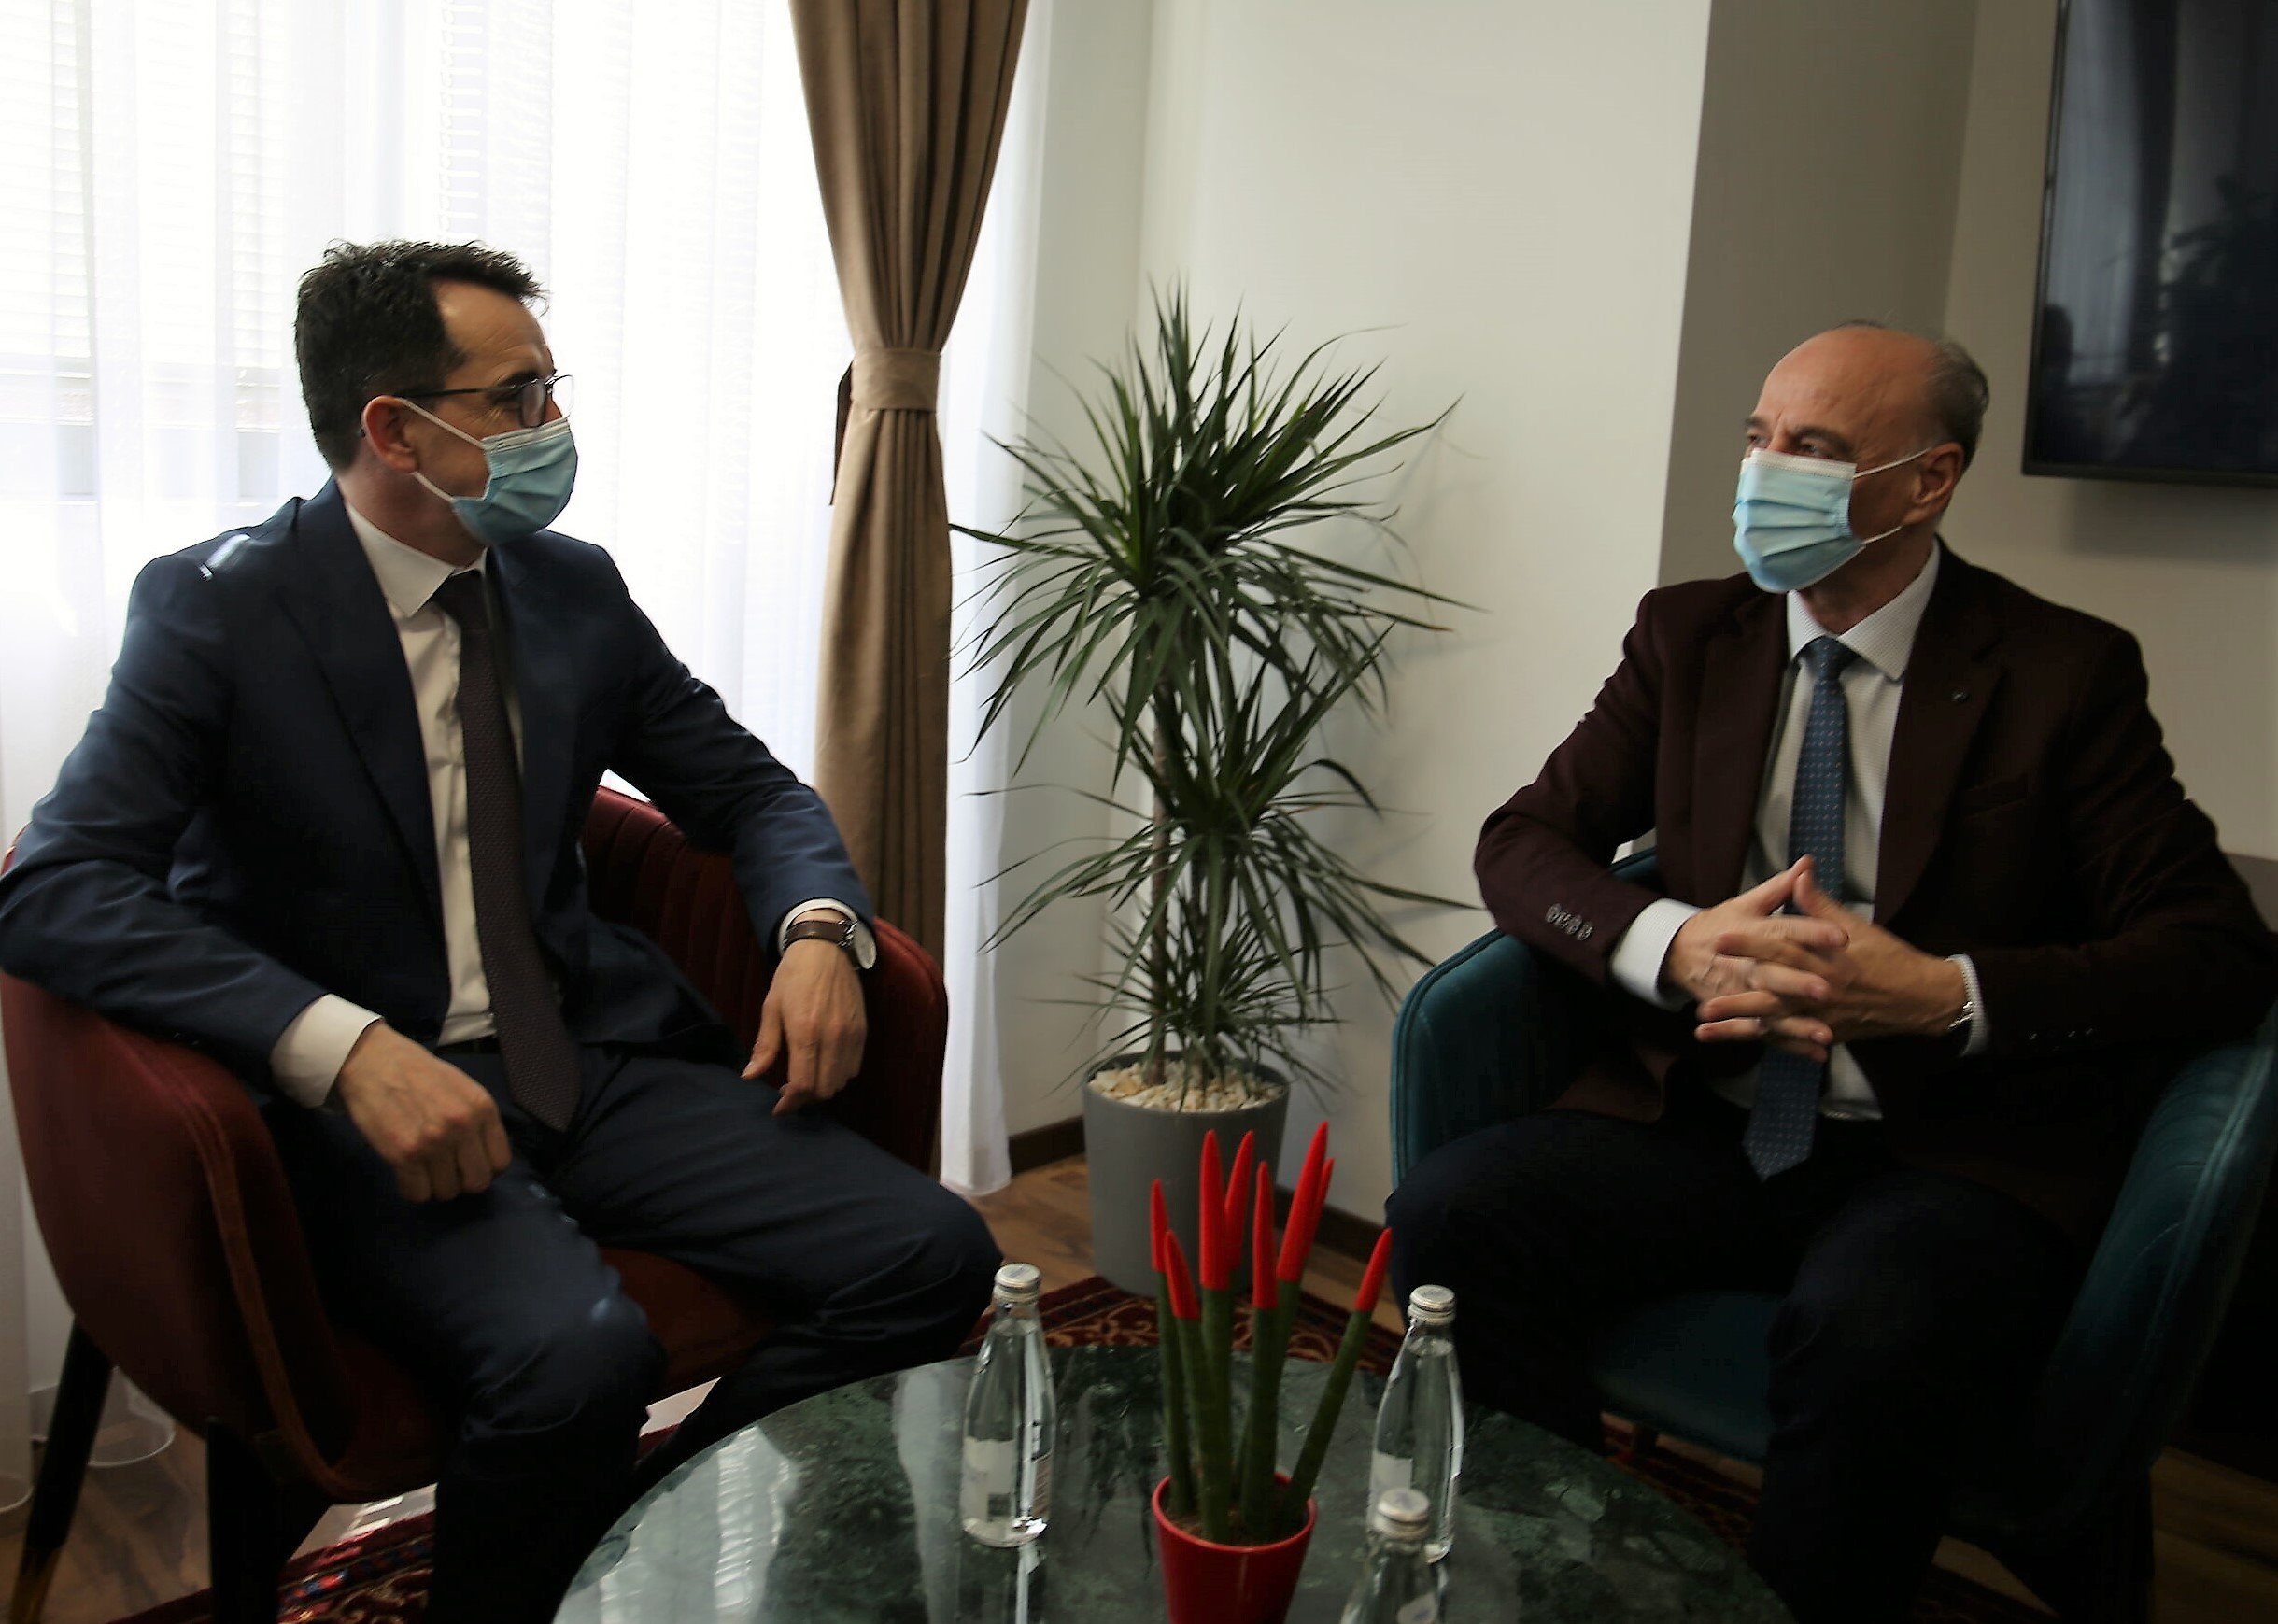 Chairman of KPC and Chairman of KJC discuss for Strengthening Rule of Law in Kosovo